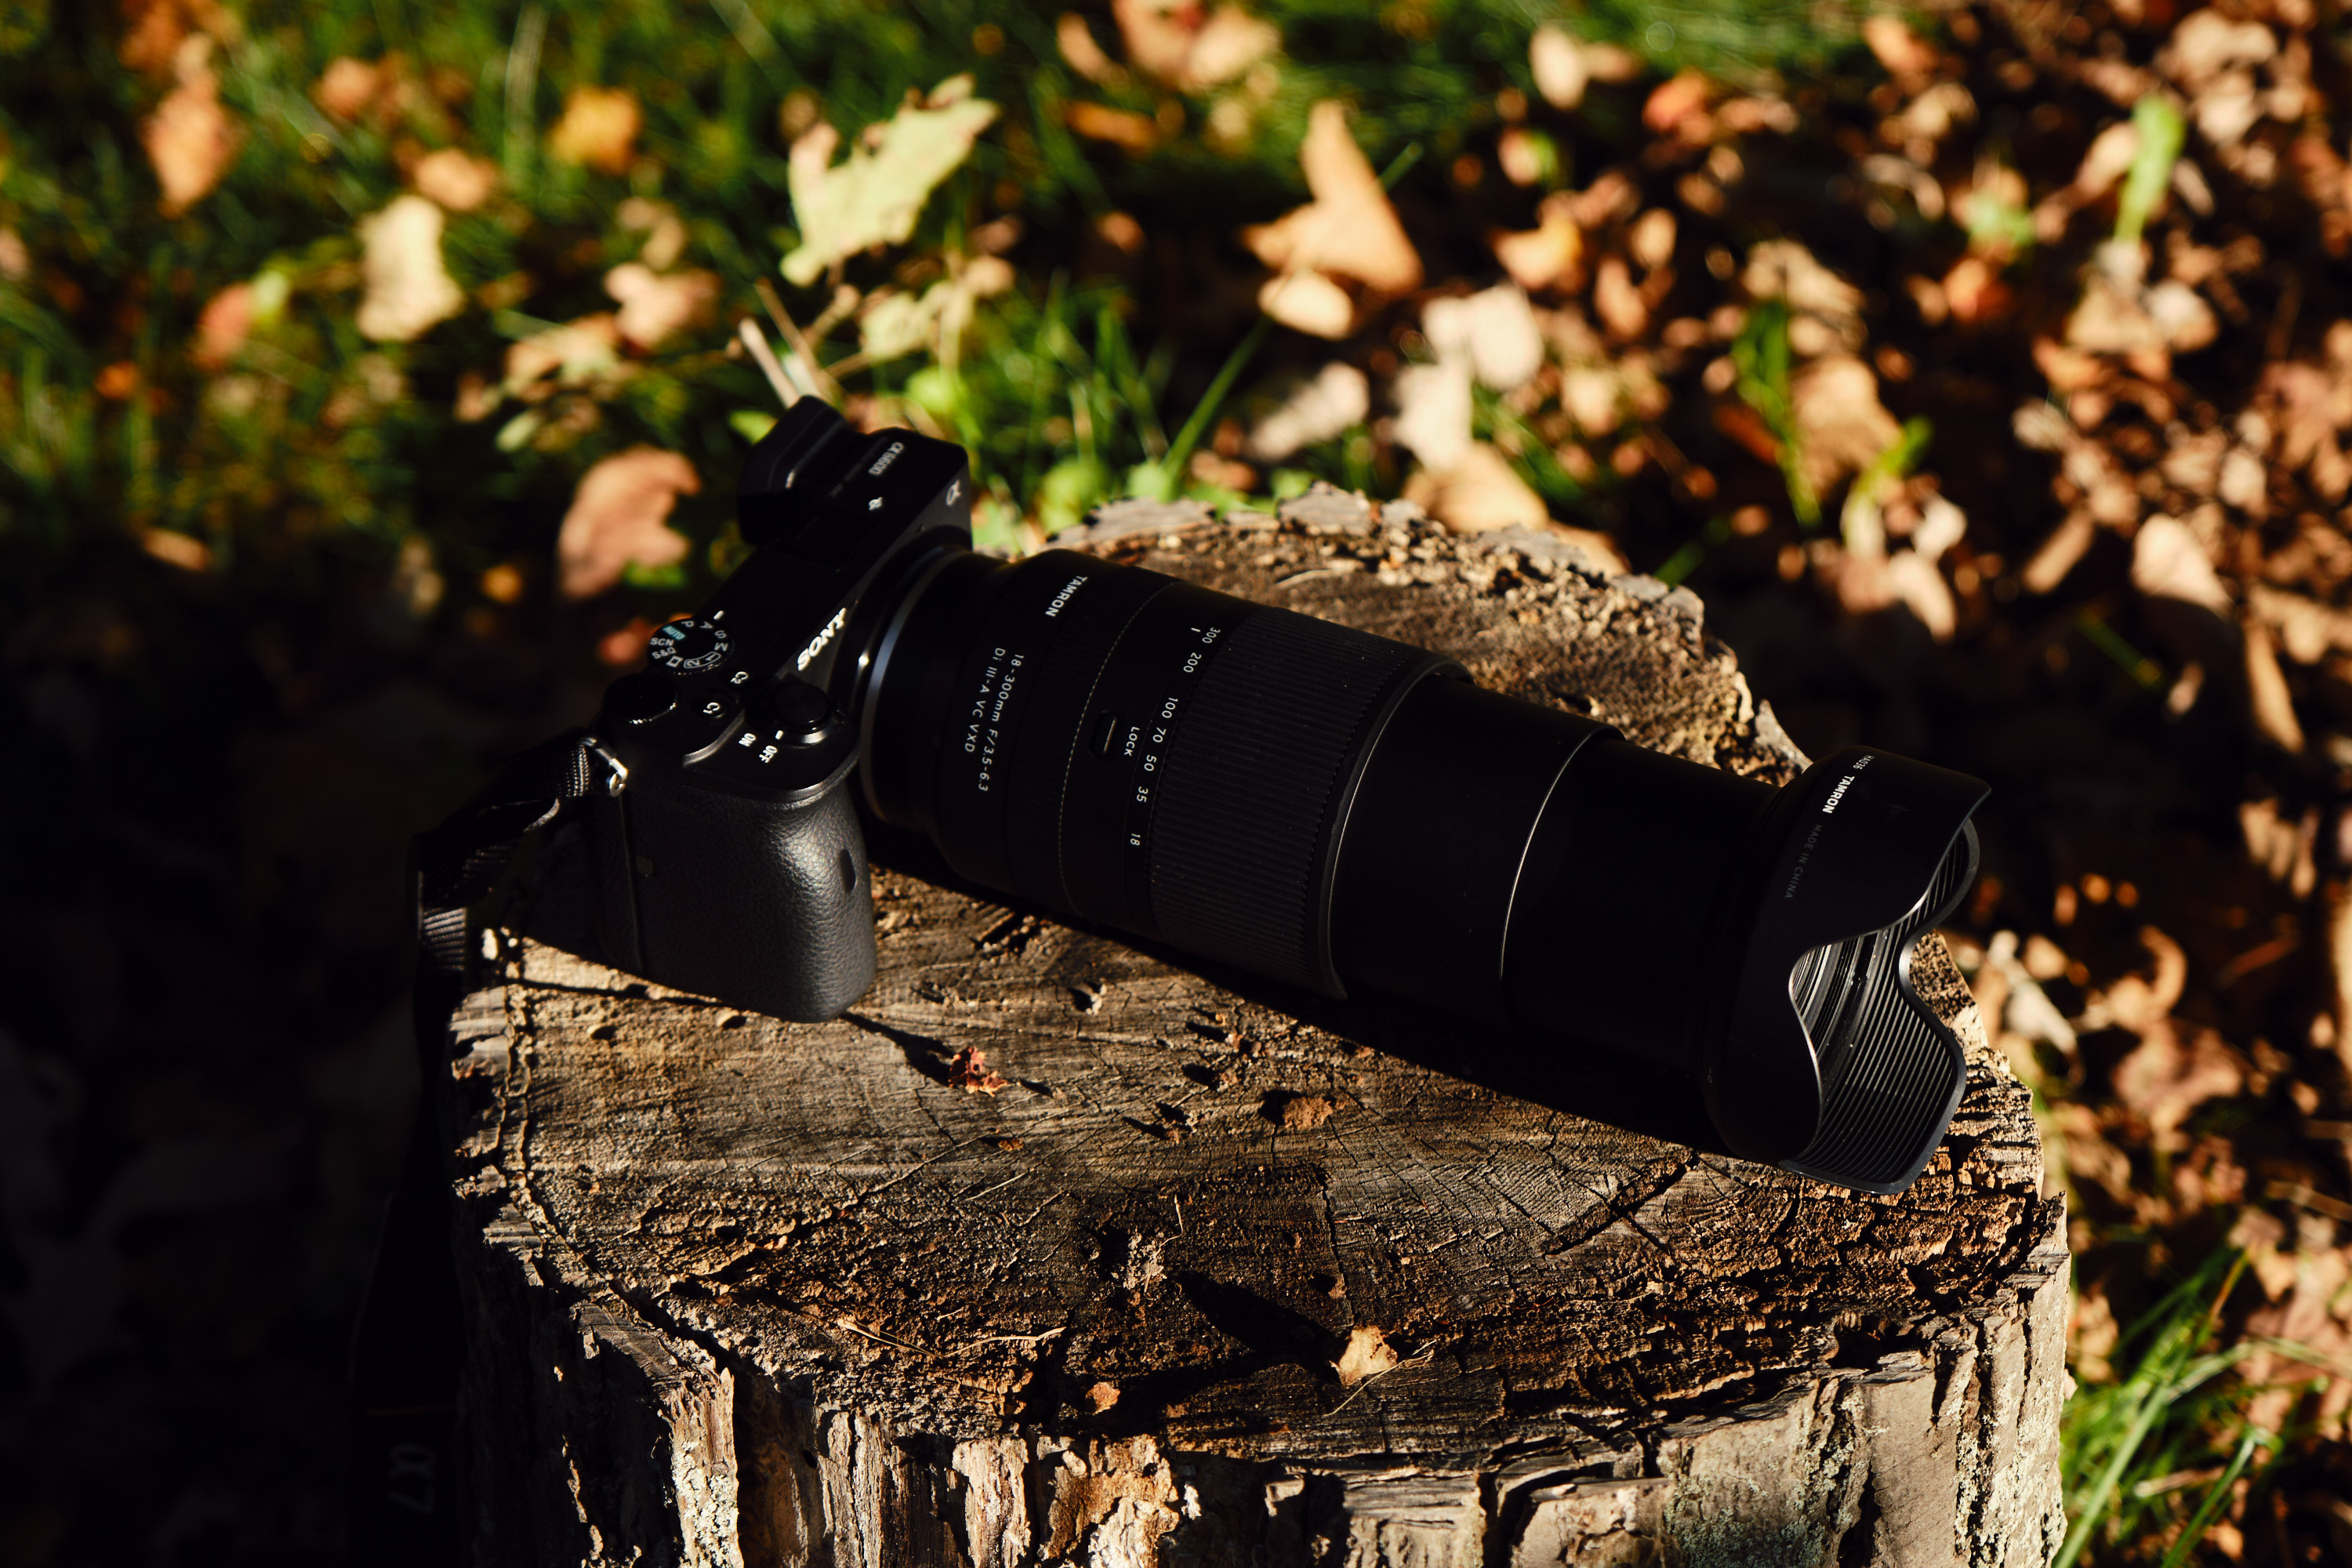 Tamron 18-300mm f3.5-6.3 Di III Review: A Kit on Steroids